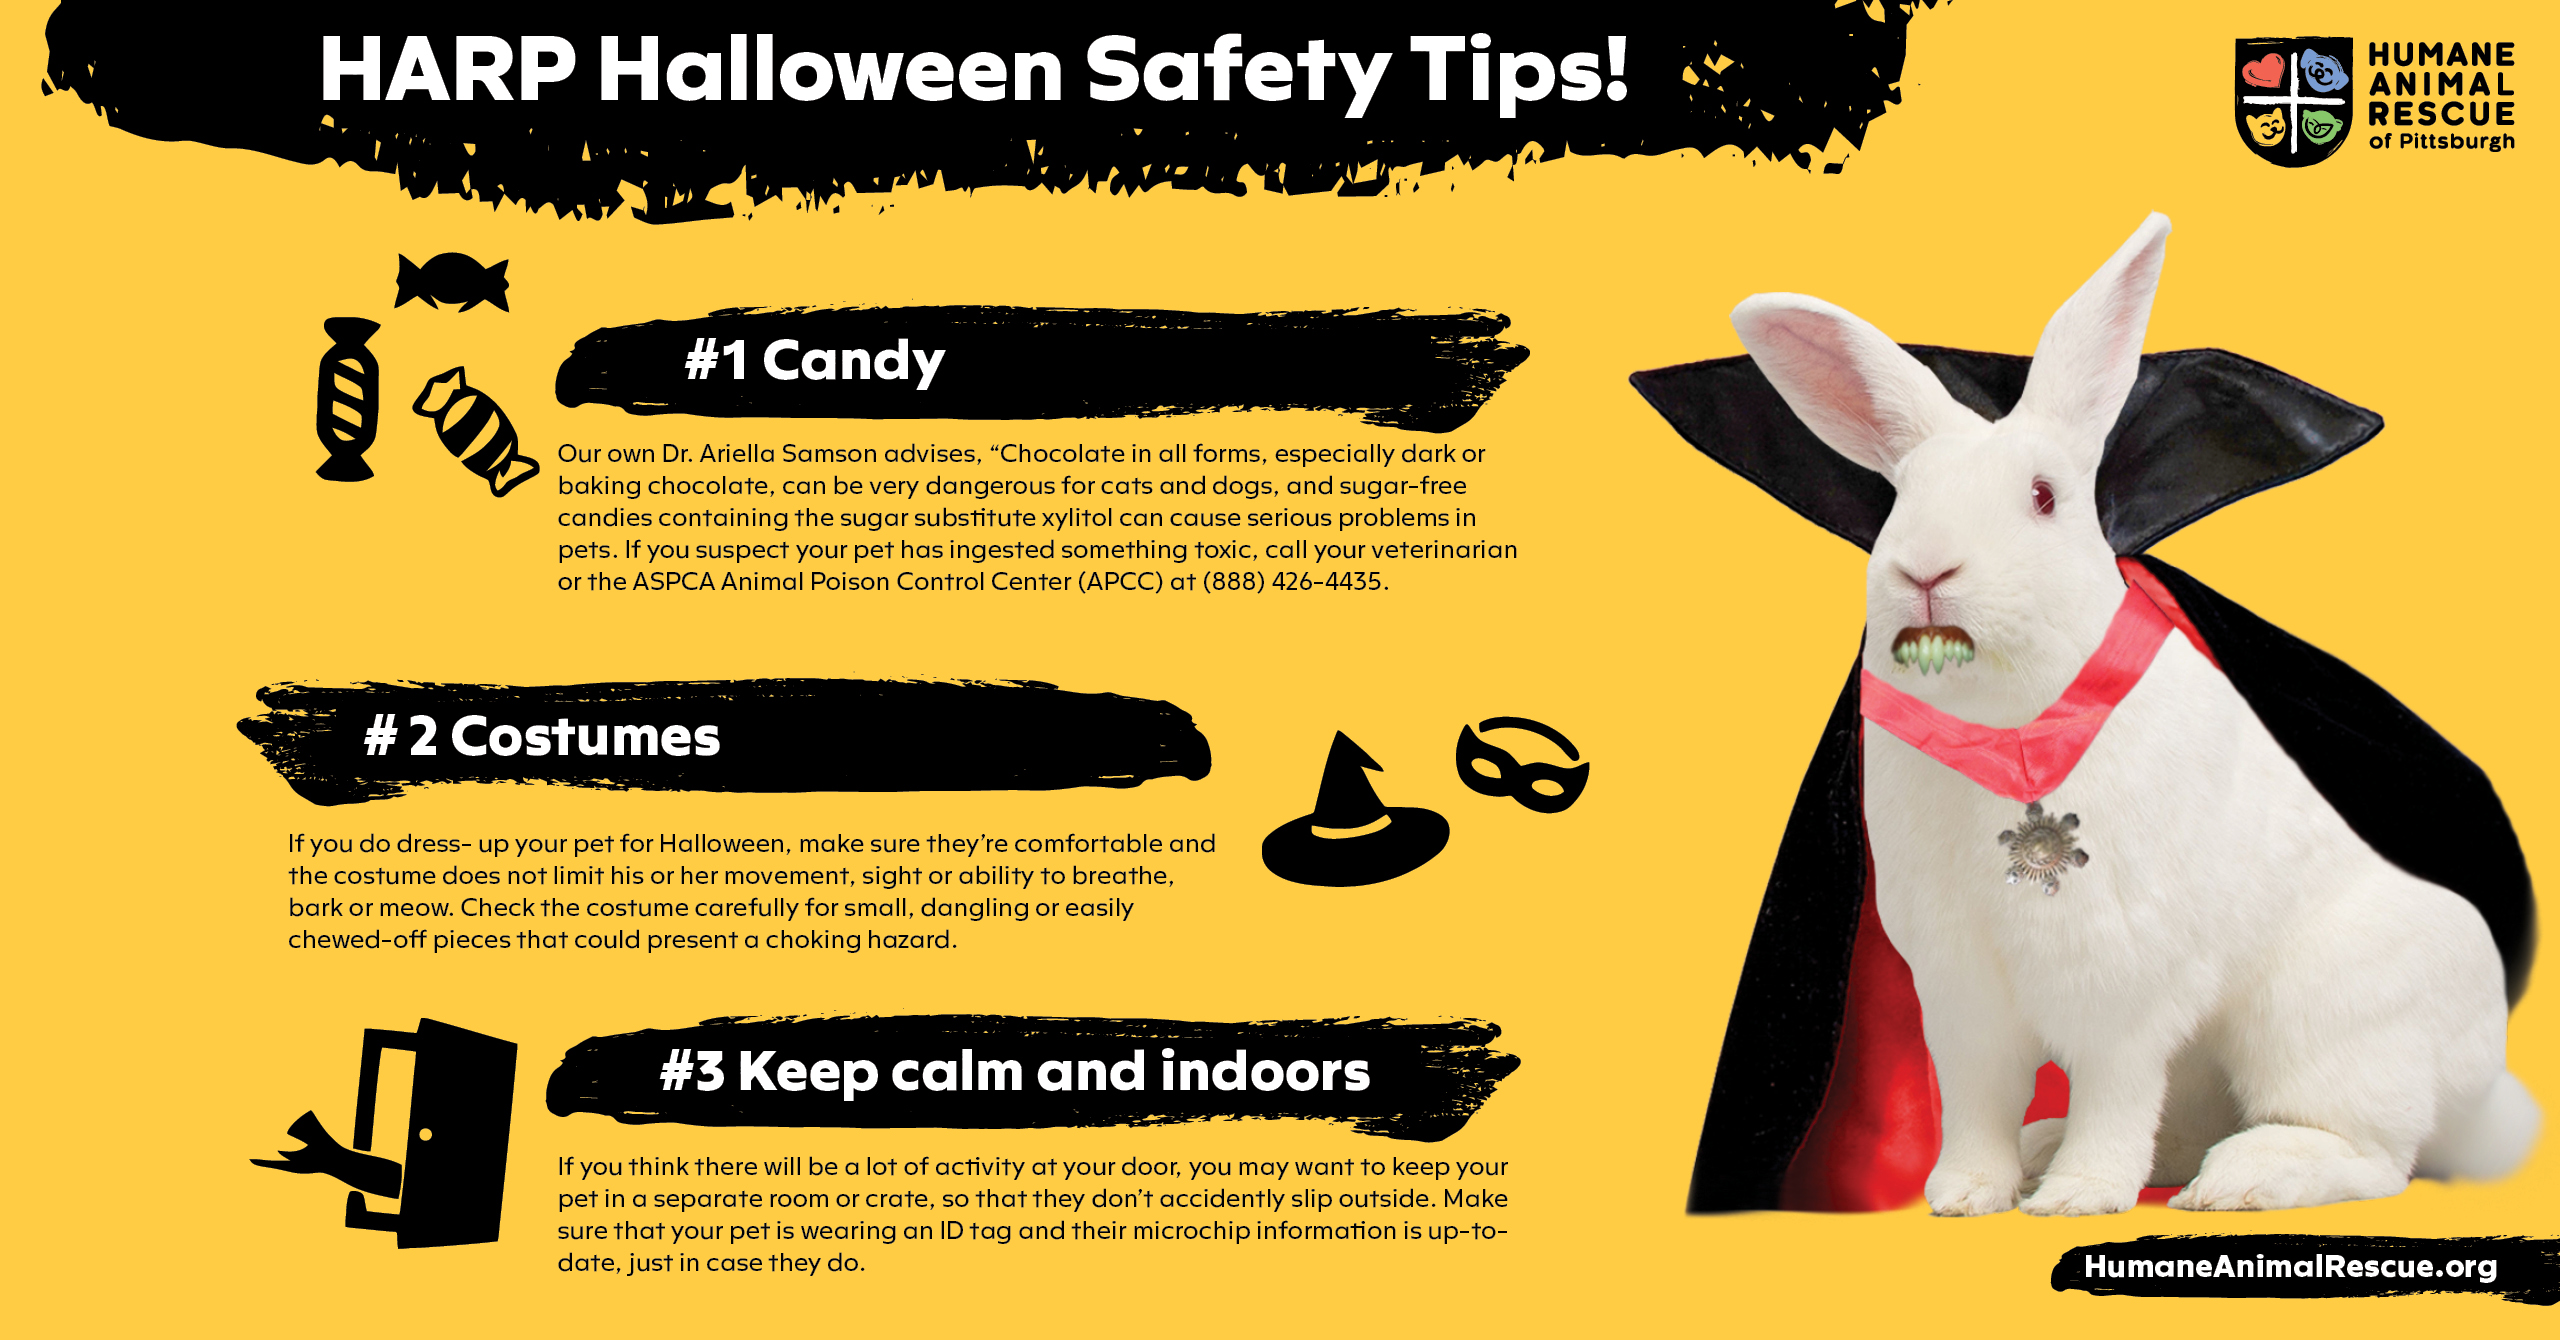 Keeping Your Pet Safe On Halloween Doesn't Have To Be Tricky - Humane Animal  Rescue Cats %